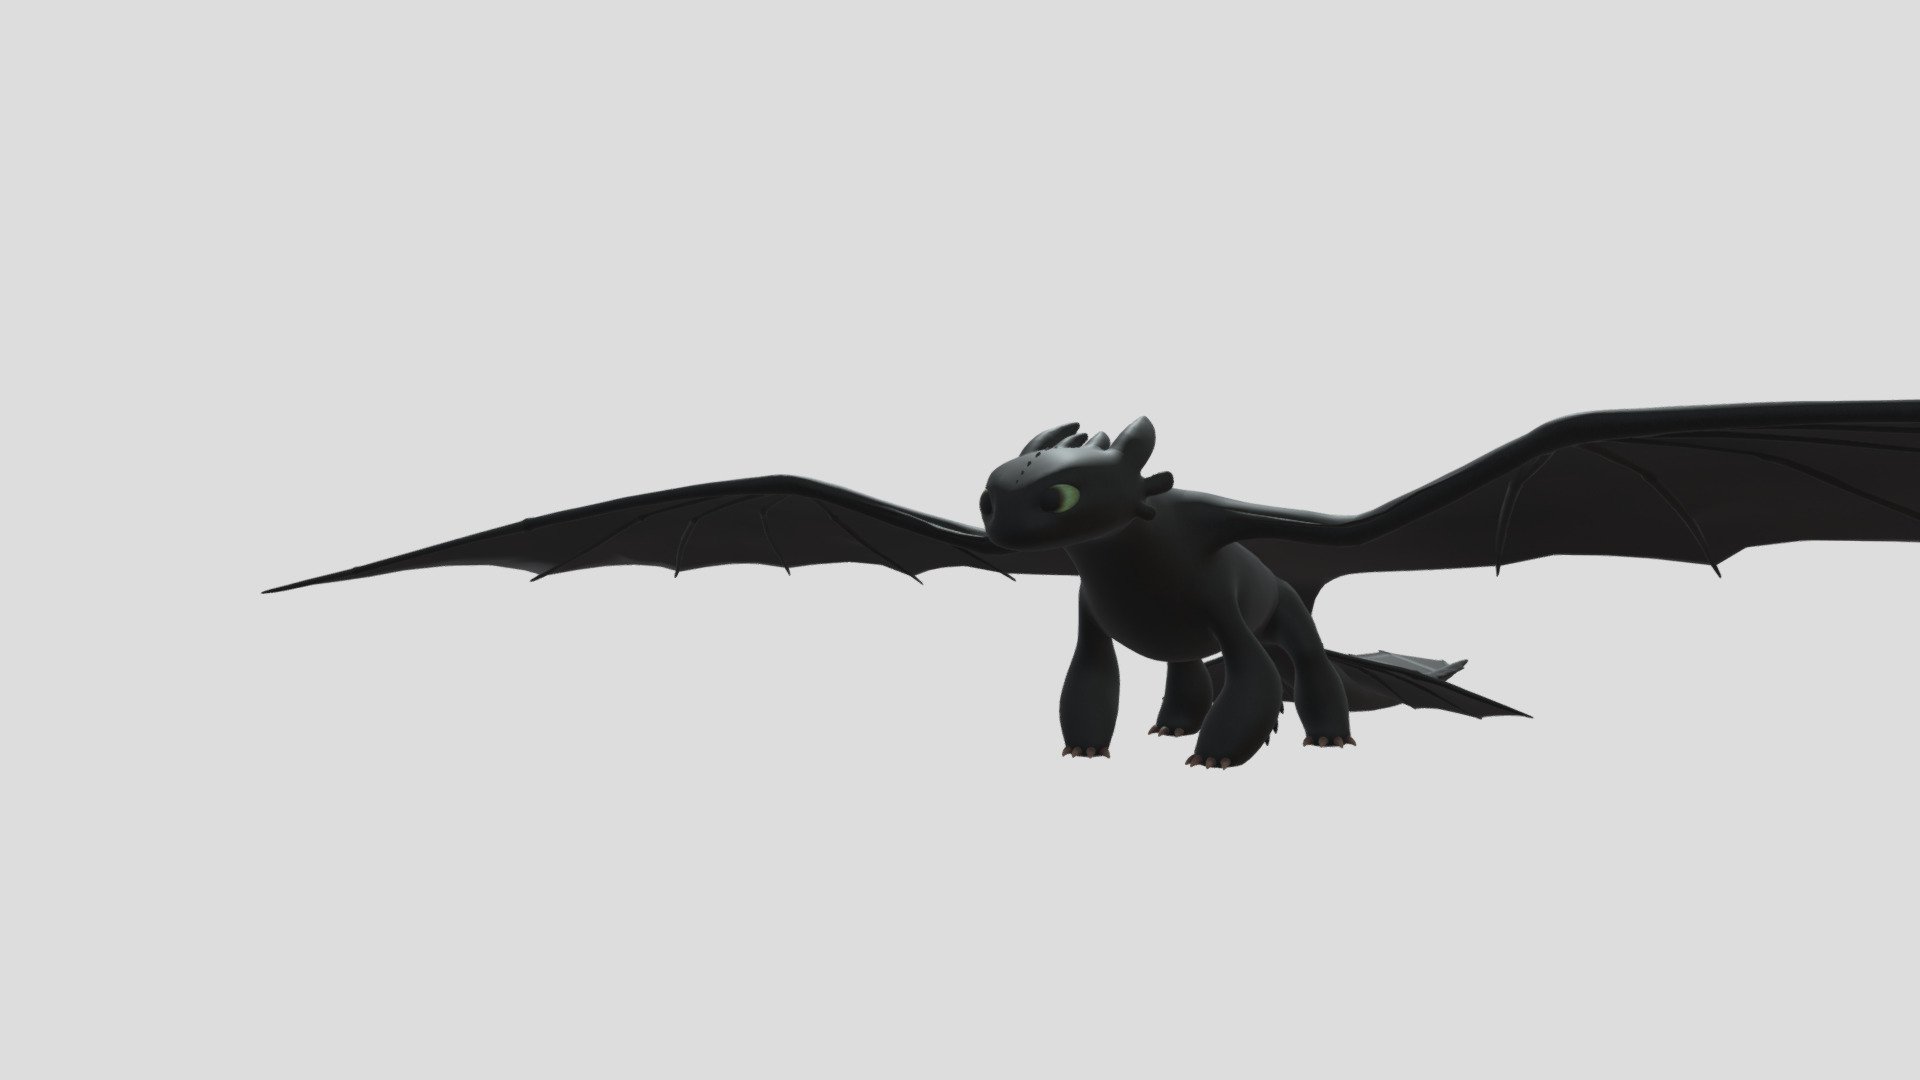 How to train your dragon toothless model

This model is a reupload of &ldquo;Toothless - HTTYD